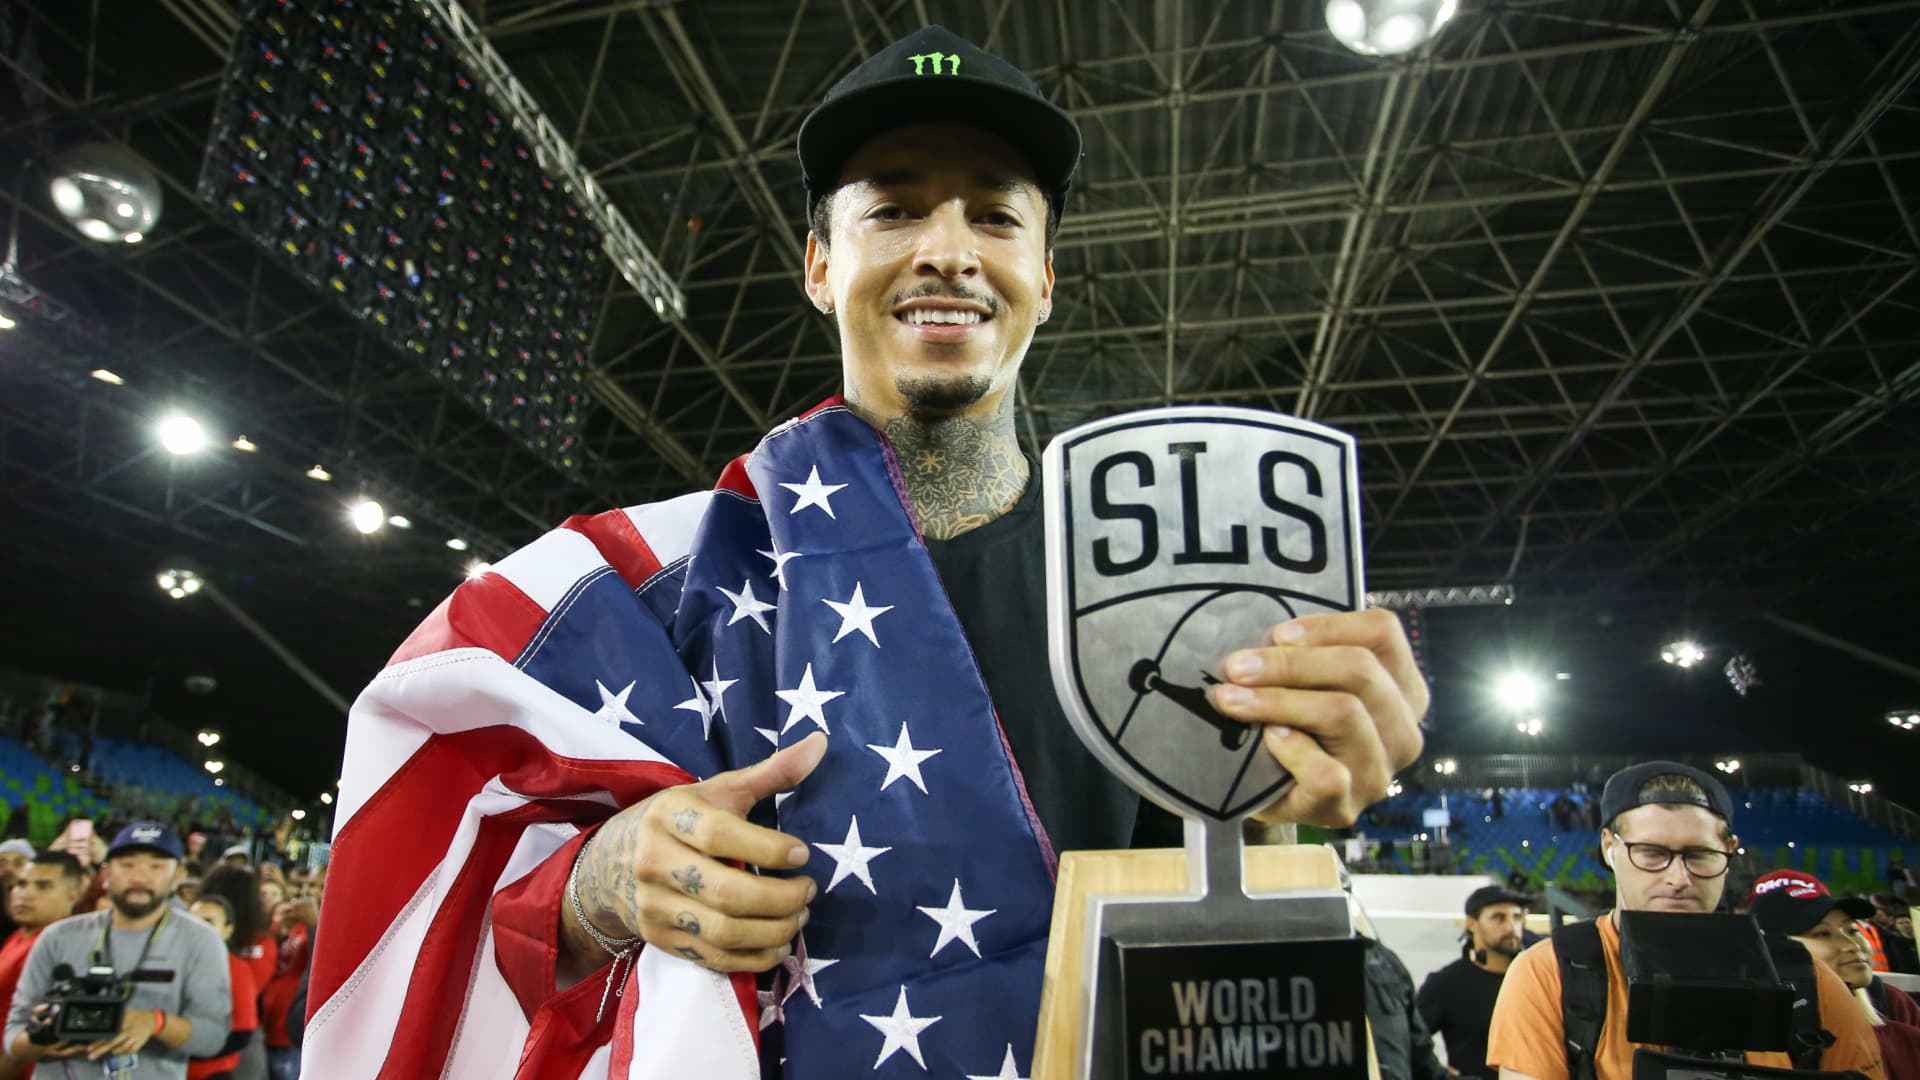 Nyjah Huston of the United States poses with his trophy after winning the first place during the WS/SLS 2019 World Championship at Parque Anhembi on September 22, 2019 in Sao Paulo, Brazil.